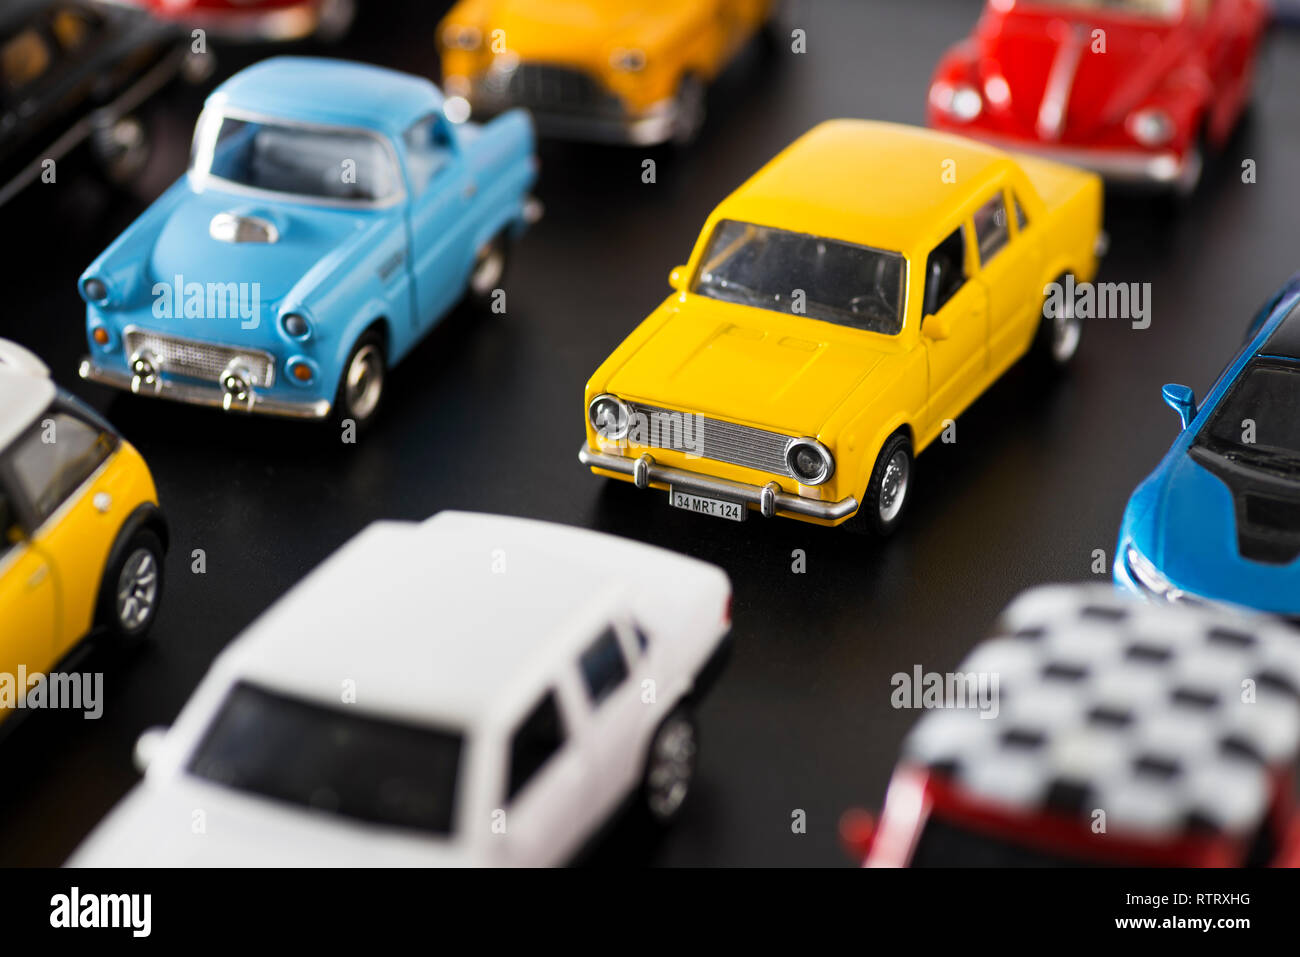 Izmir, Turkey - April  18, 2018: Various some brand toy cars on a black ground, looks like a traffic jam on the road. Stock Photo